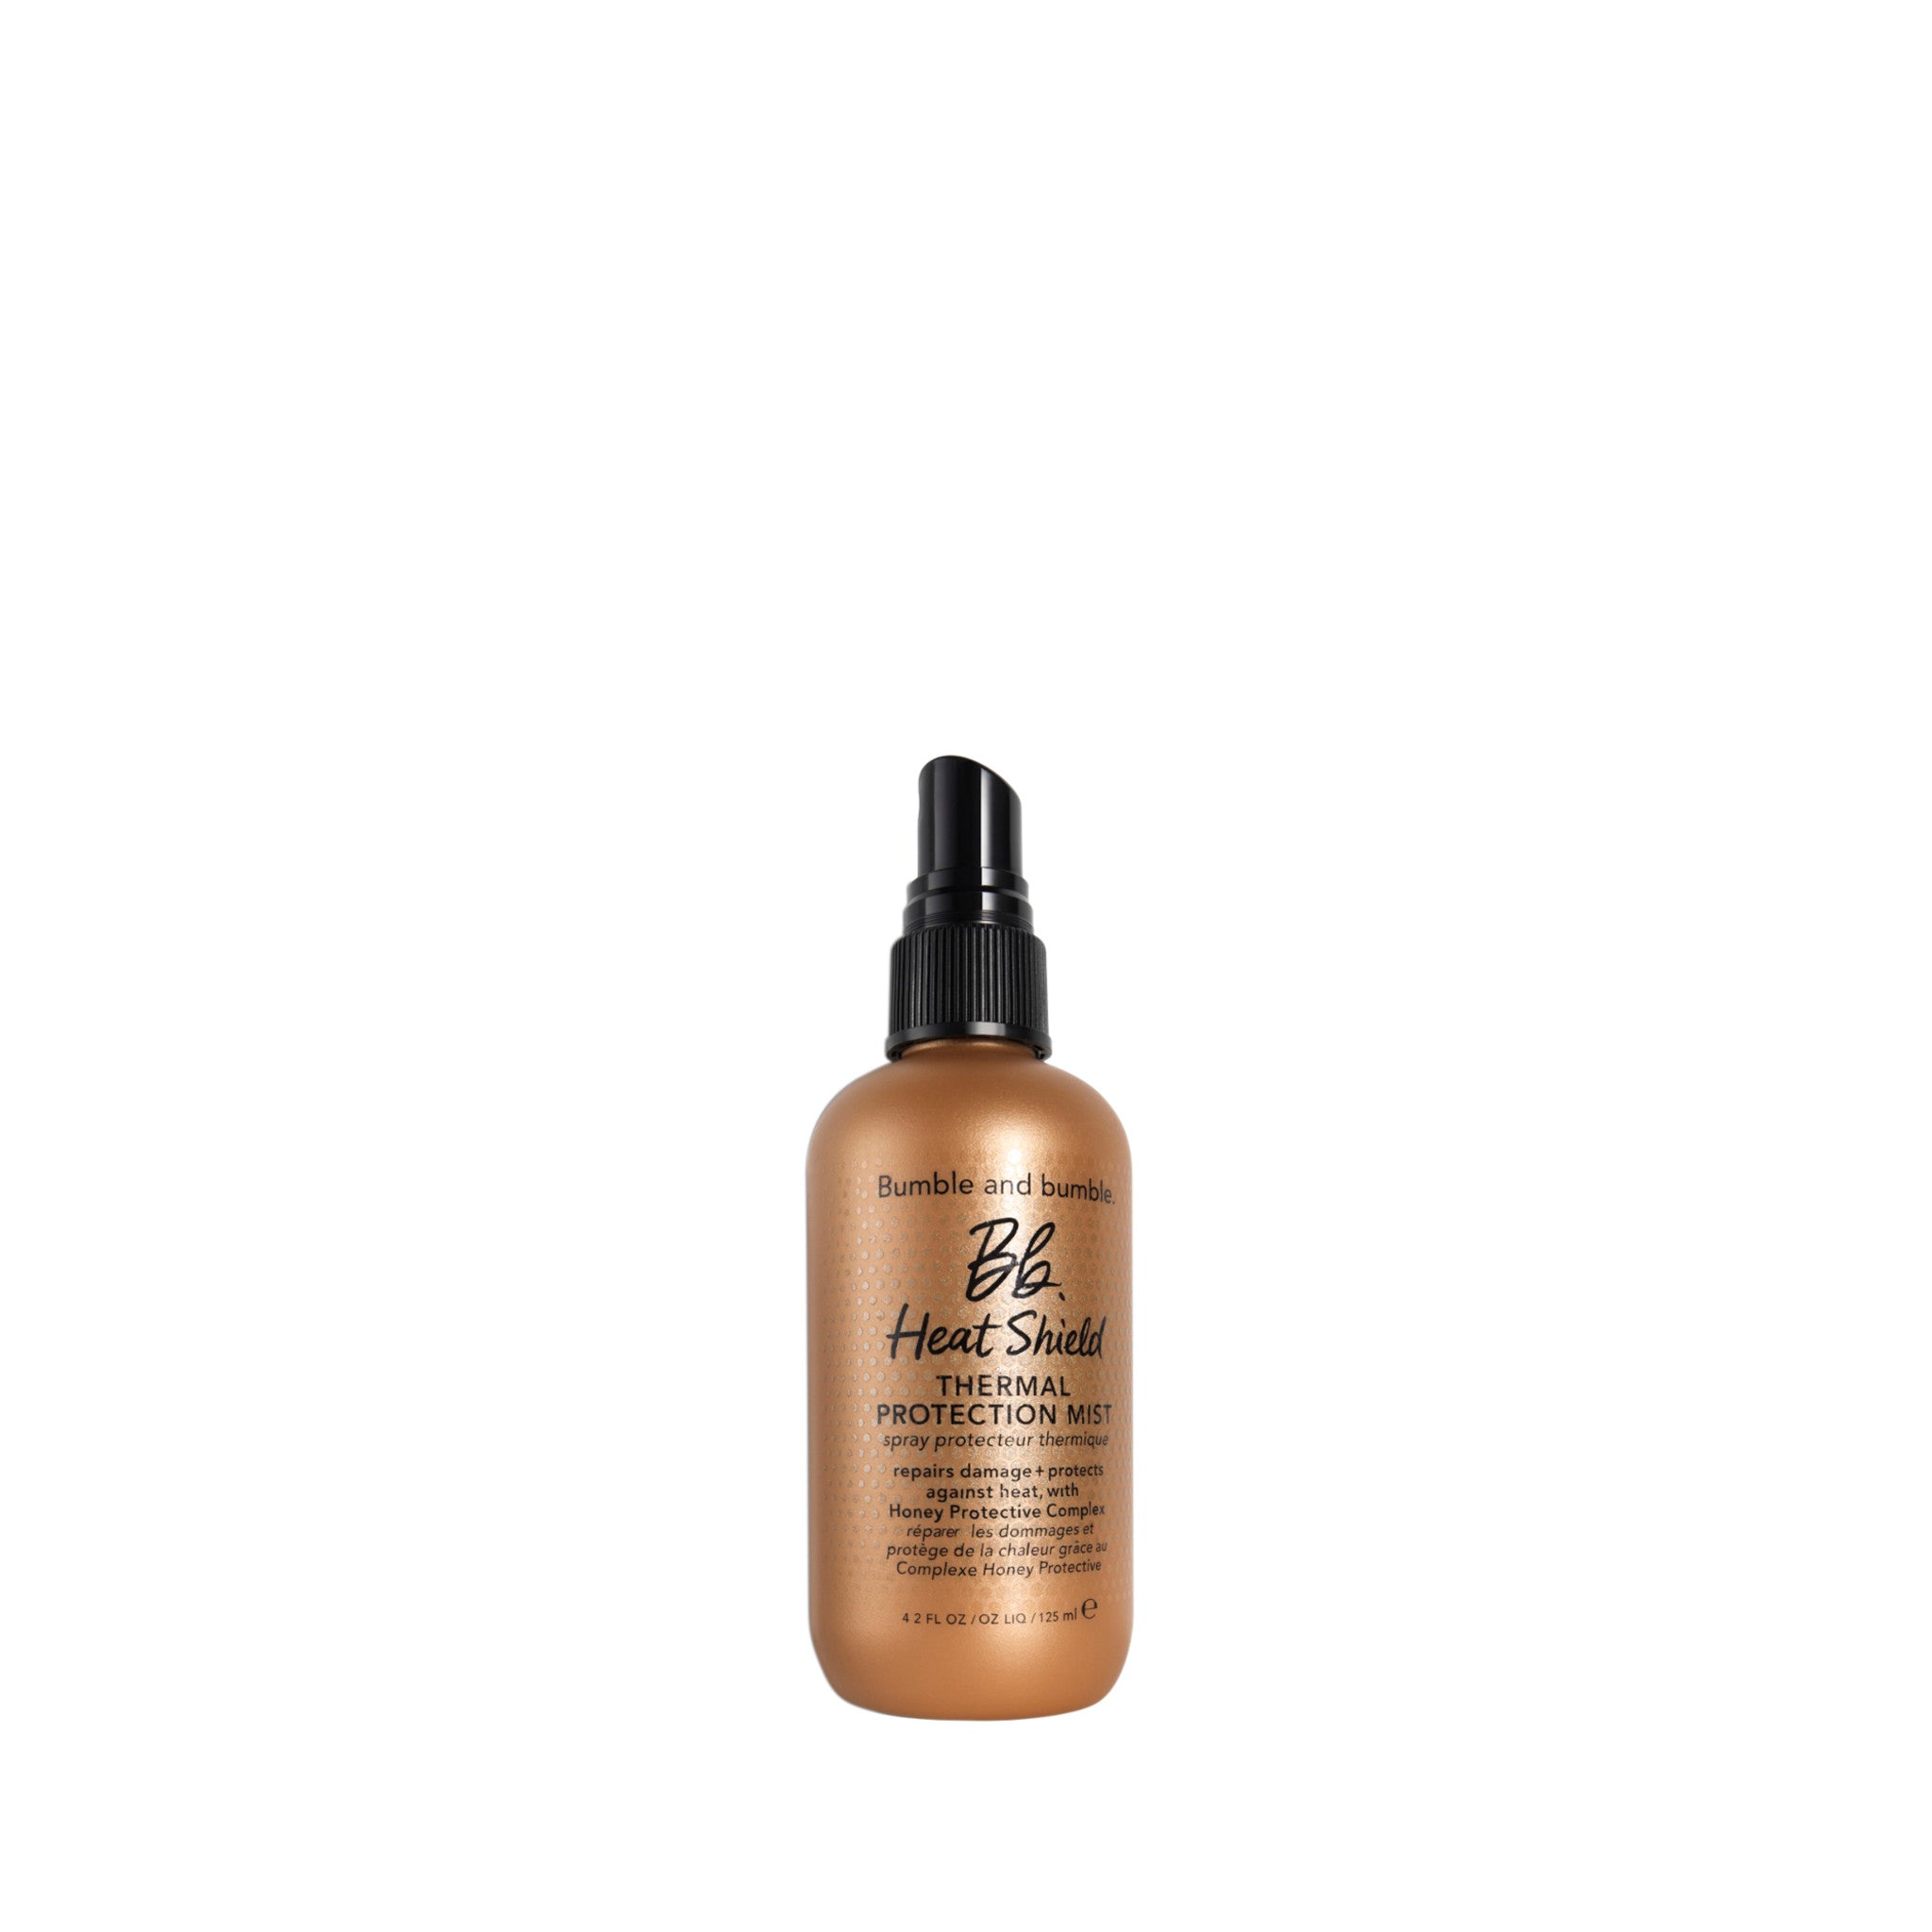 Bumble and Bumble Heat Shield Thermal Protection Mist Size variant: 4.2 fl oz | 125 ml main image.